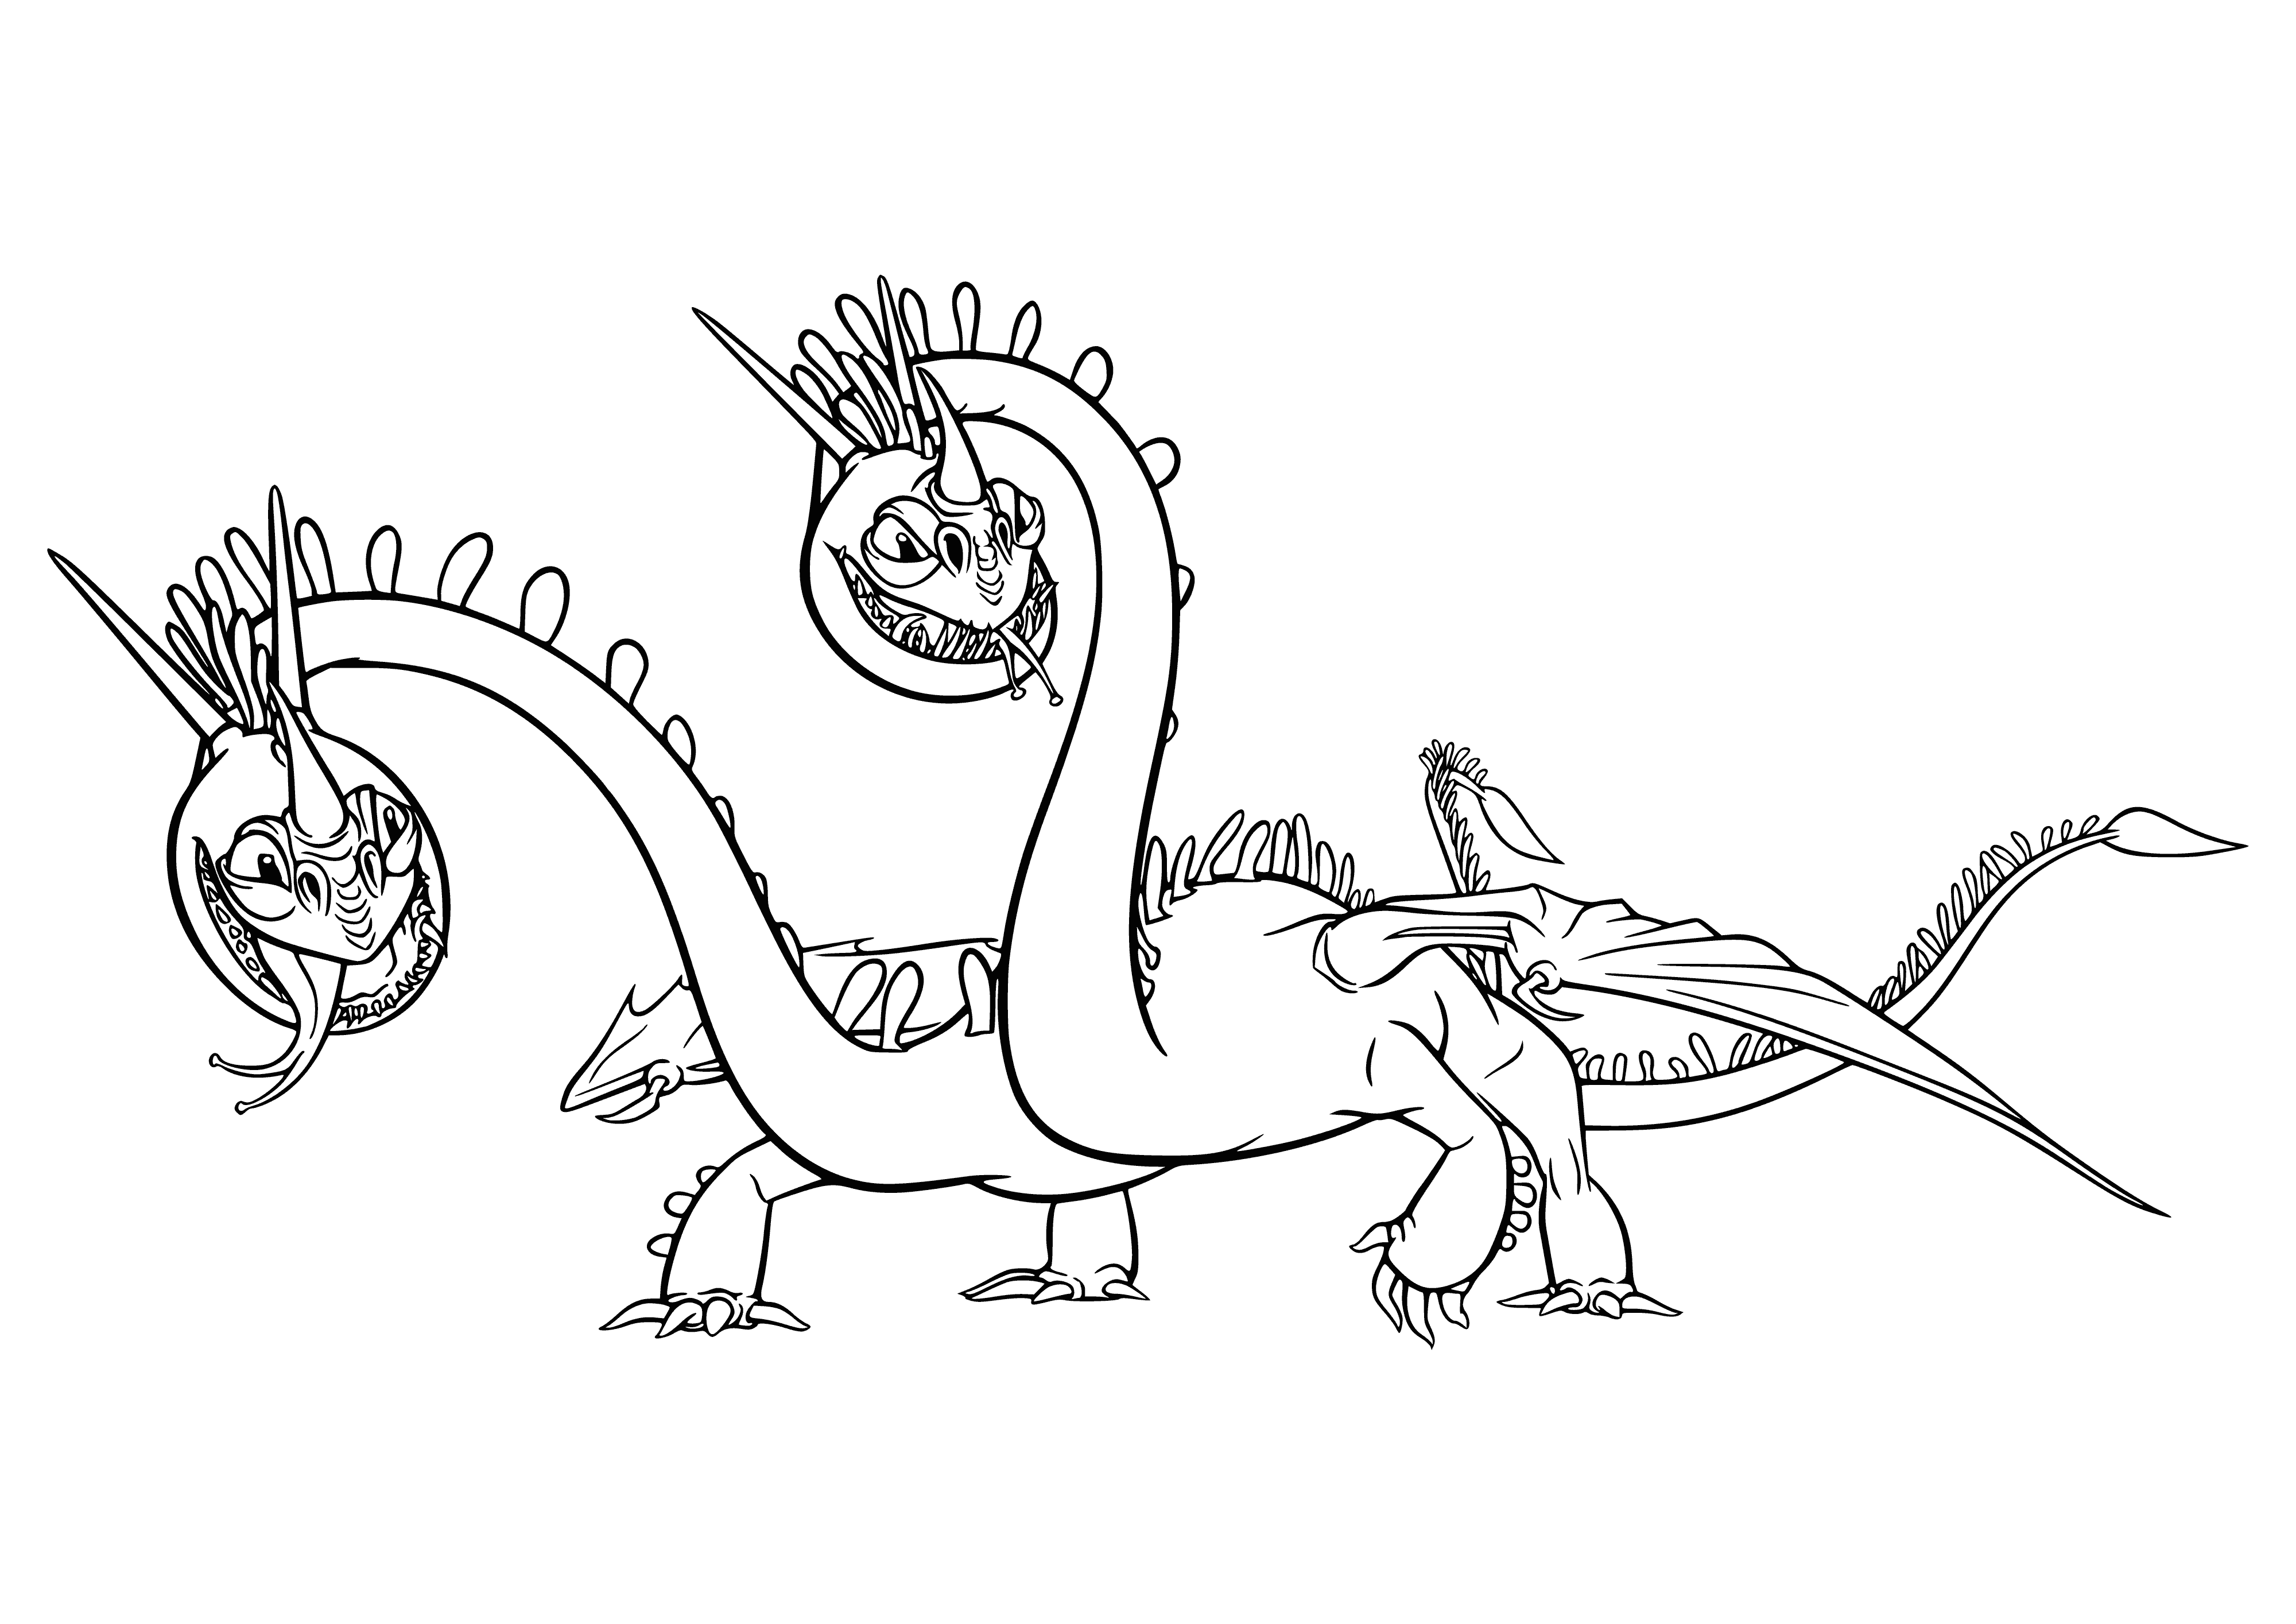 coloring page: Four mini dragons biting each other with claws out; the Dragon Pinchheads from How to Train Your Dragon.